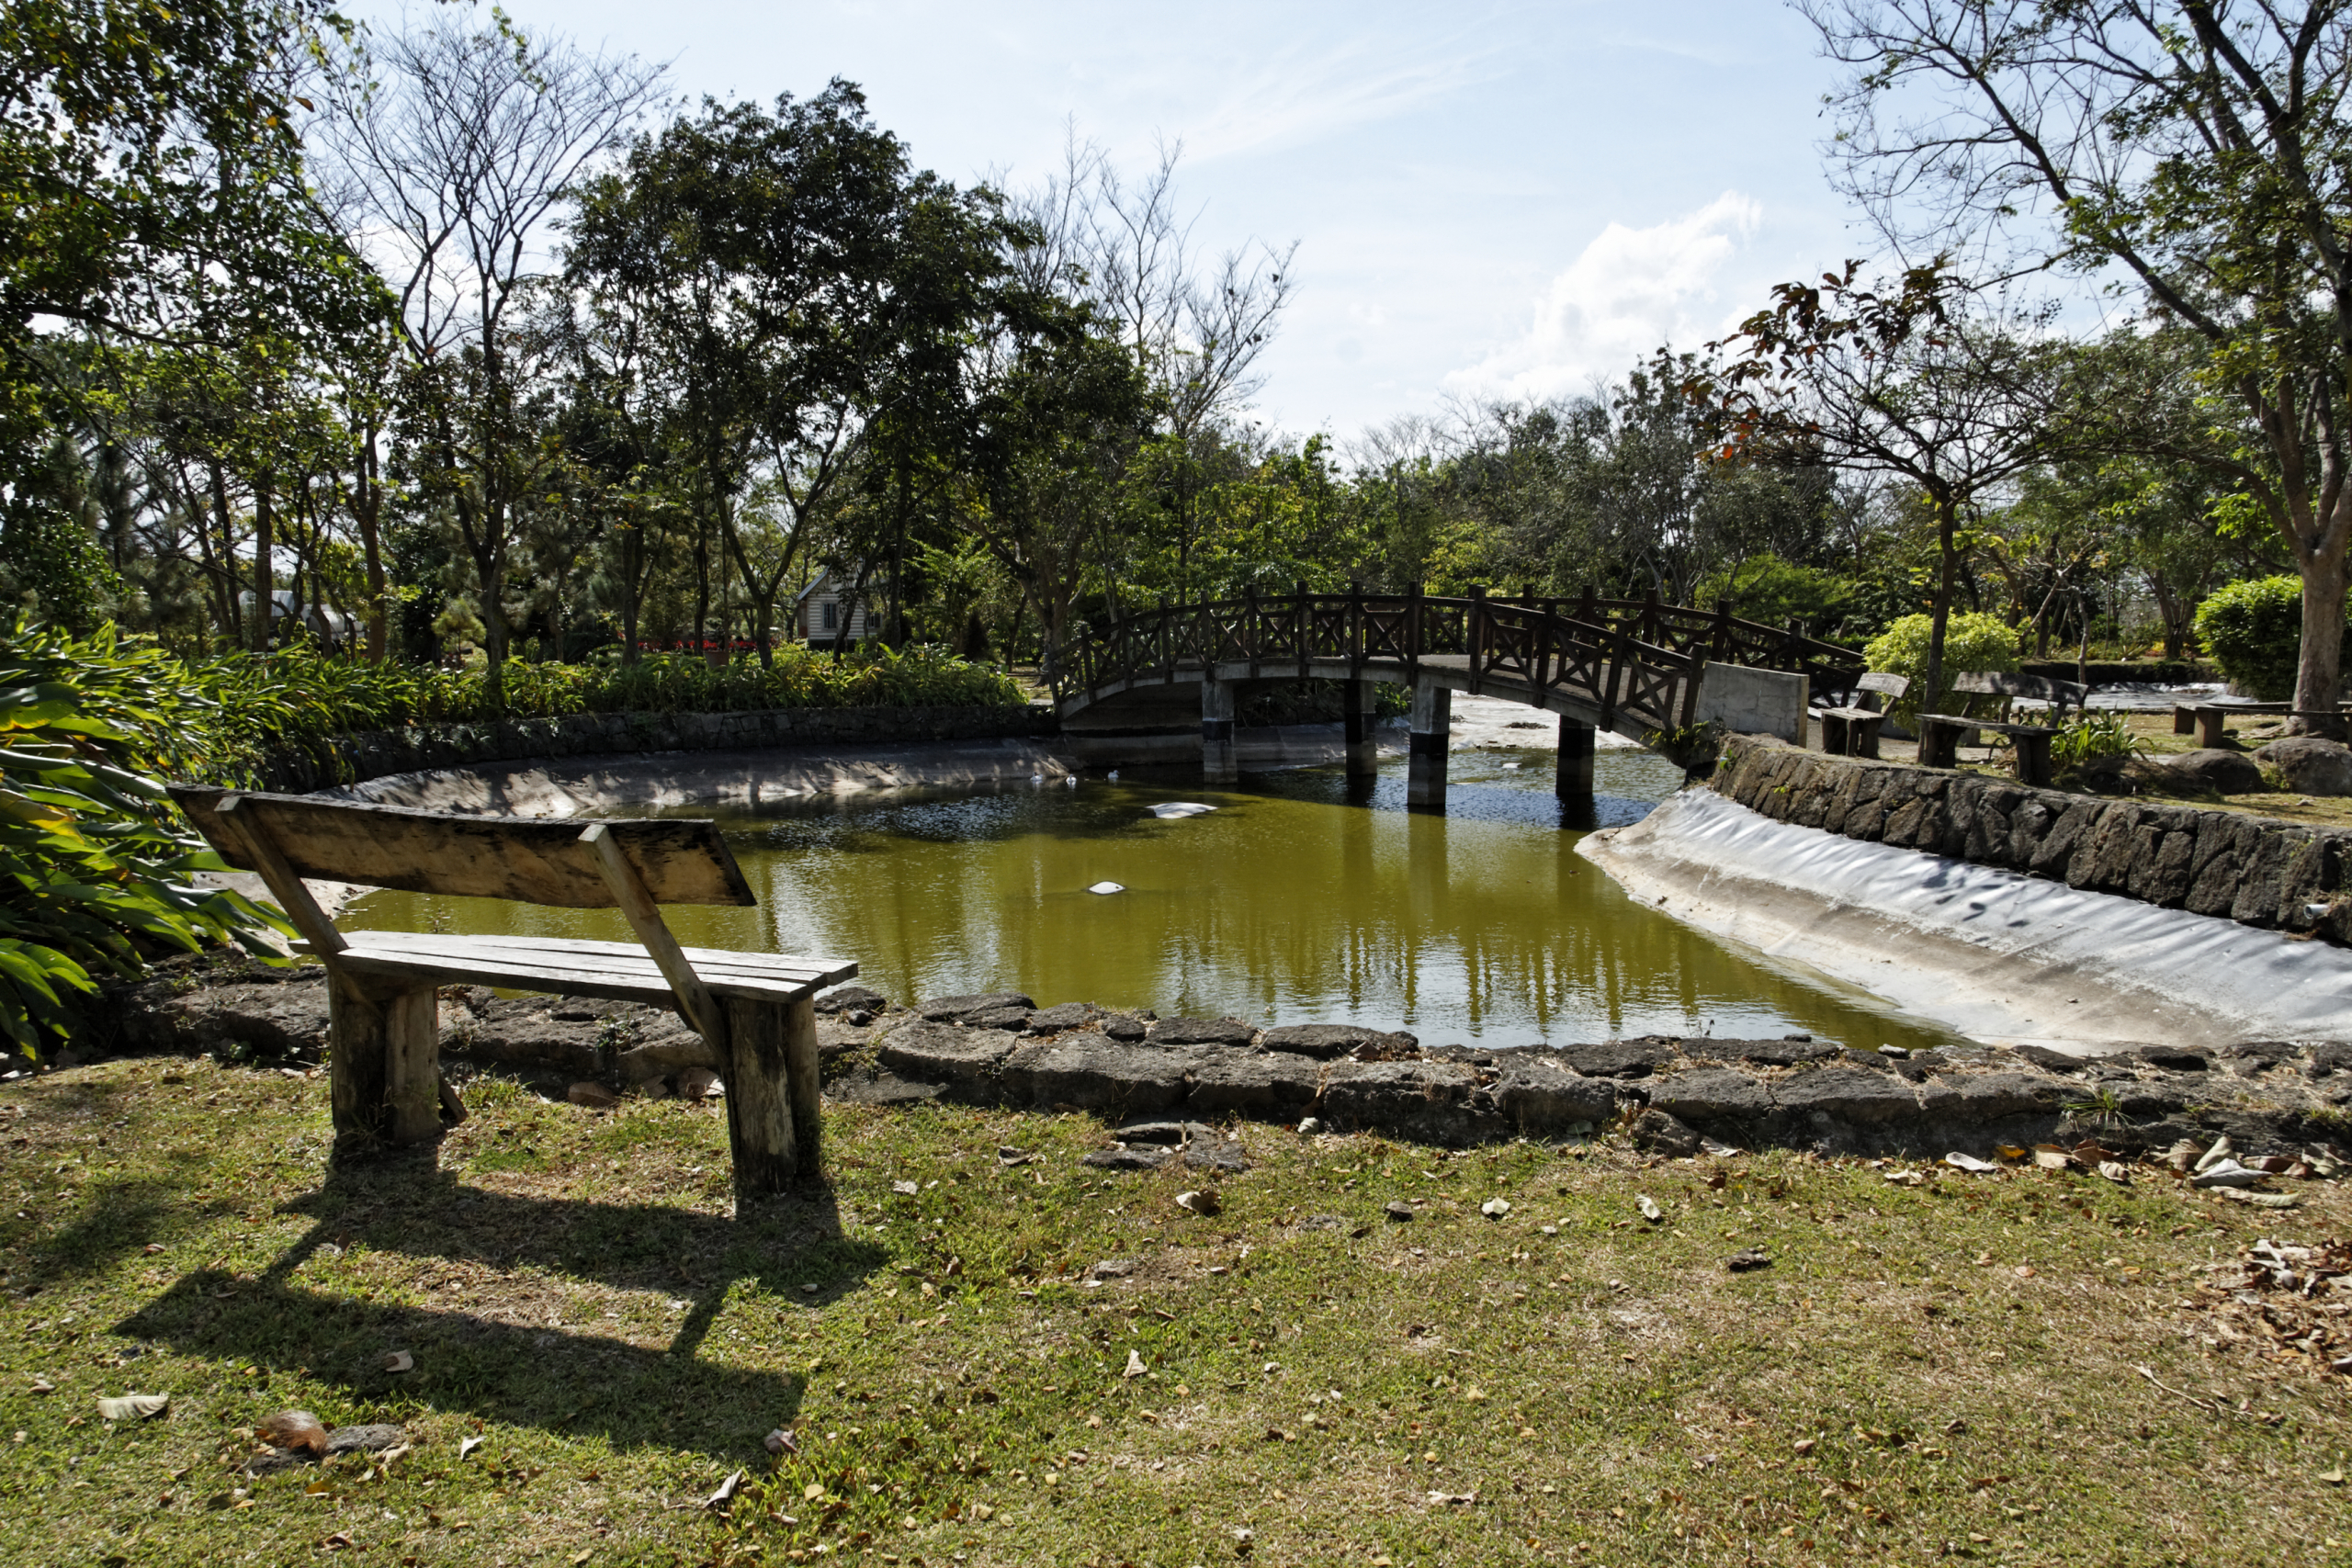 Man-made lake within the Old English community of Promenade